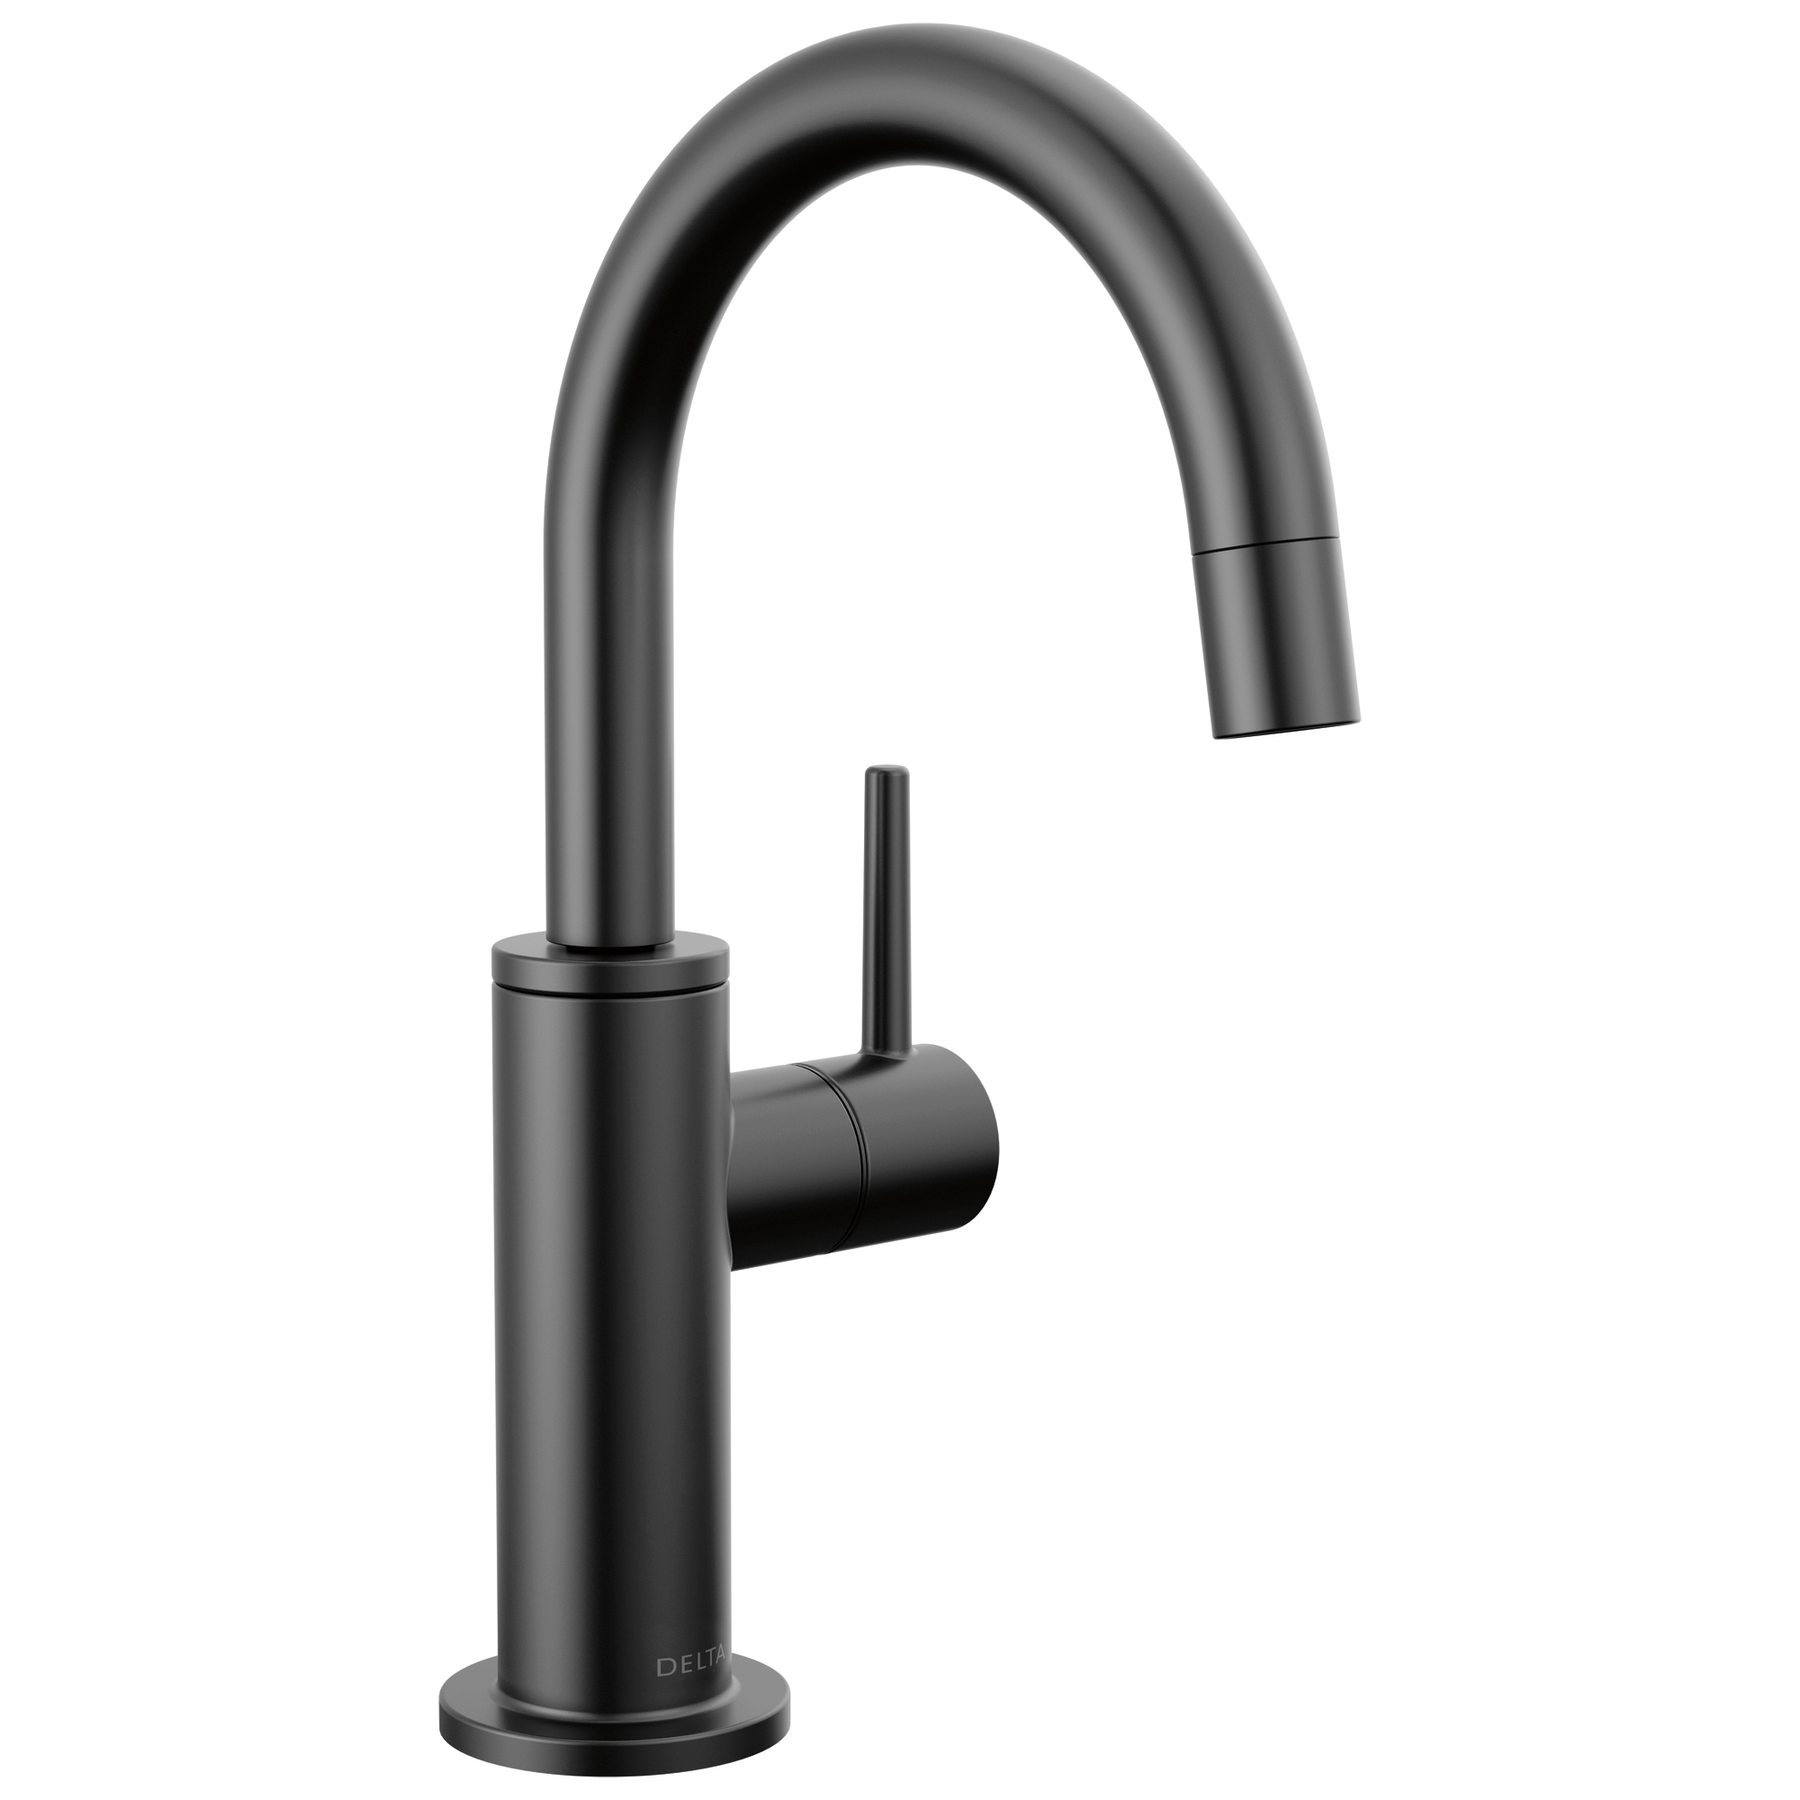 Modern Chrome Drinking Water Filter Faucet - Reverse Osmosis Filtration  System and Kitchen Sink Beverage Faucet